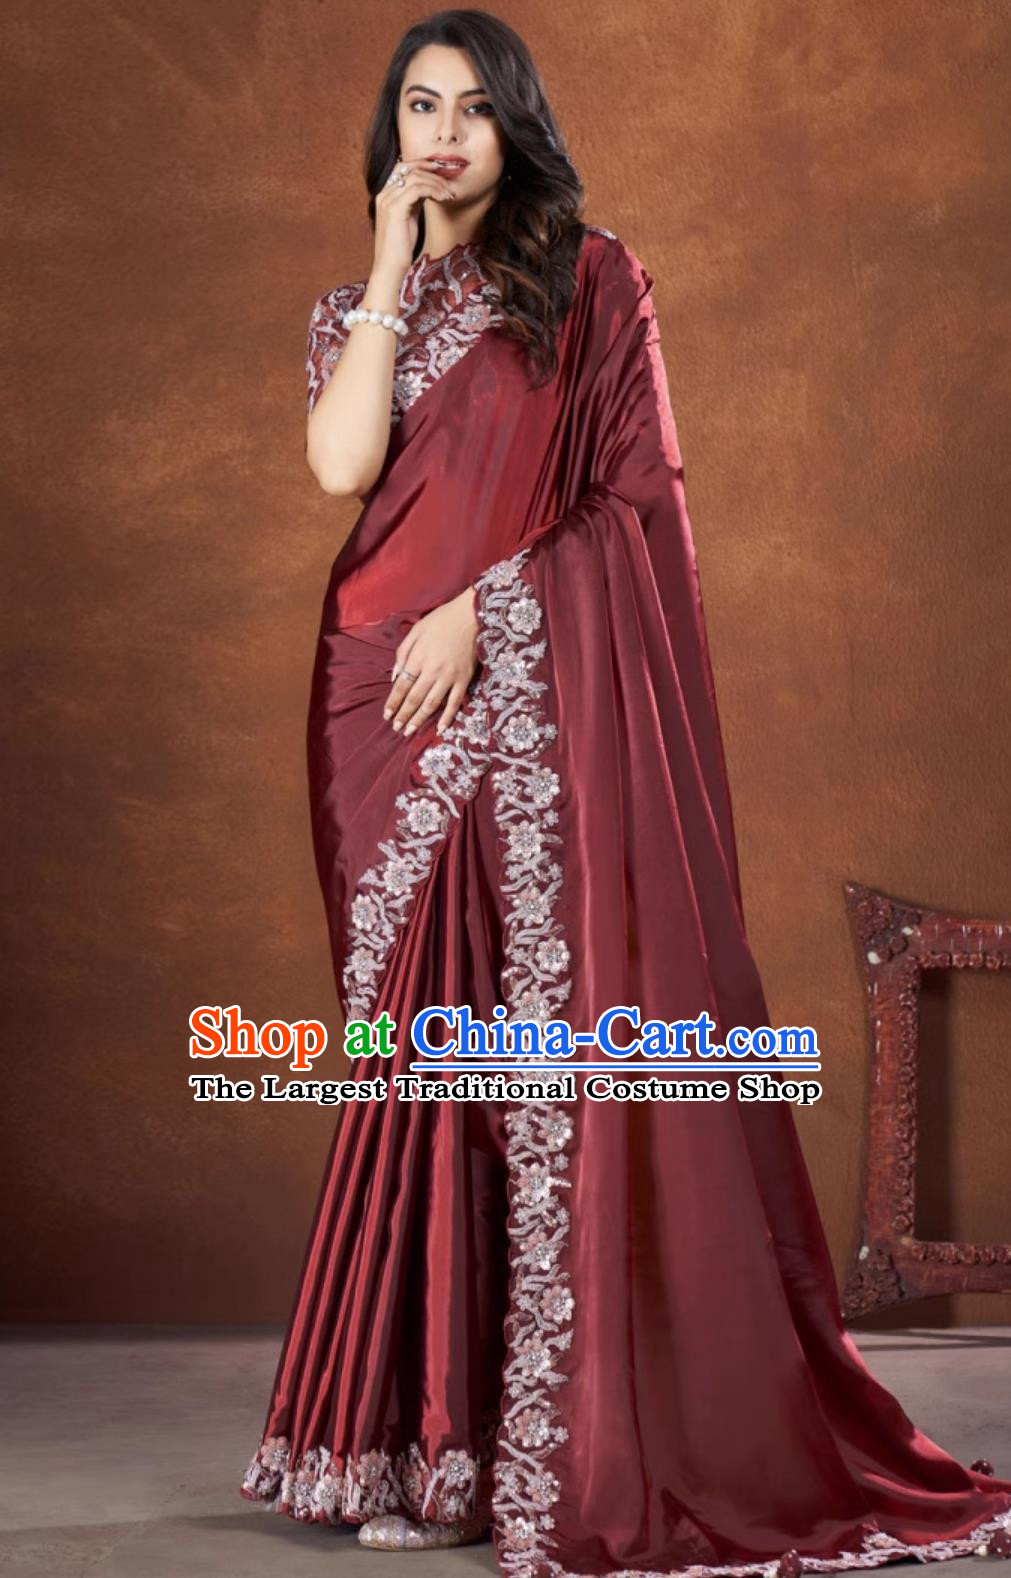 Maroon Embroidered National Indian Sari With Diamonds Features Traditional Festival Party Women Wrap Skirt Sari